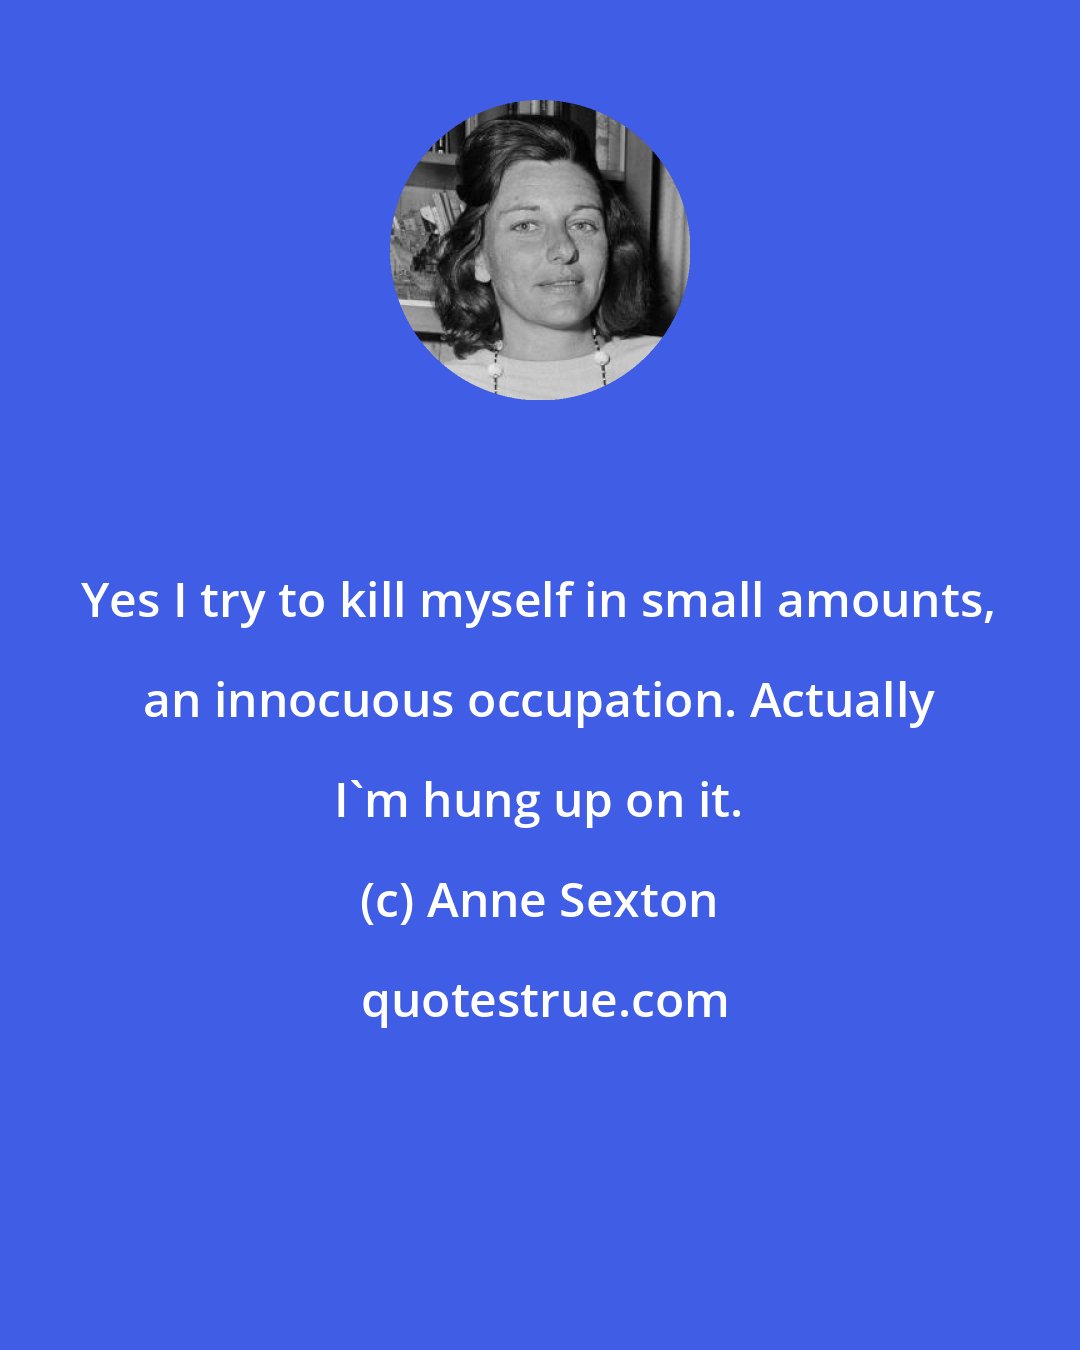 Anne Sexton: Yes I try to kill myself in small amounts, an innocuous occupation. Actually I'm hung up on it.